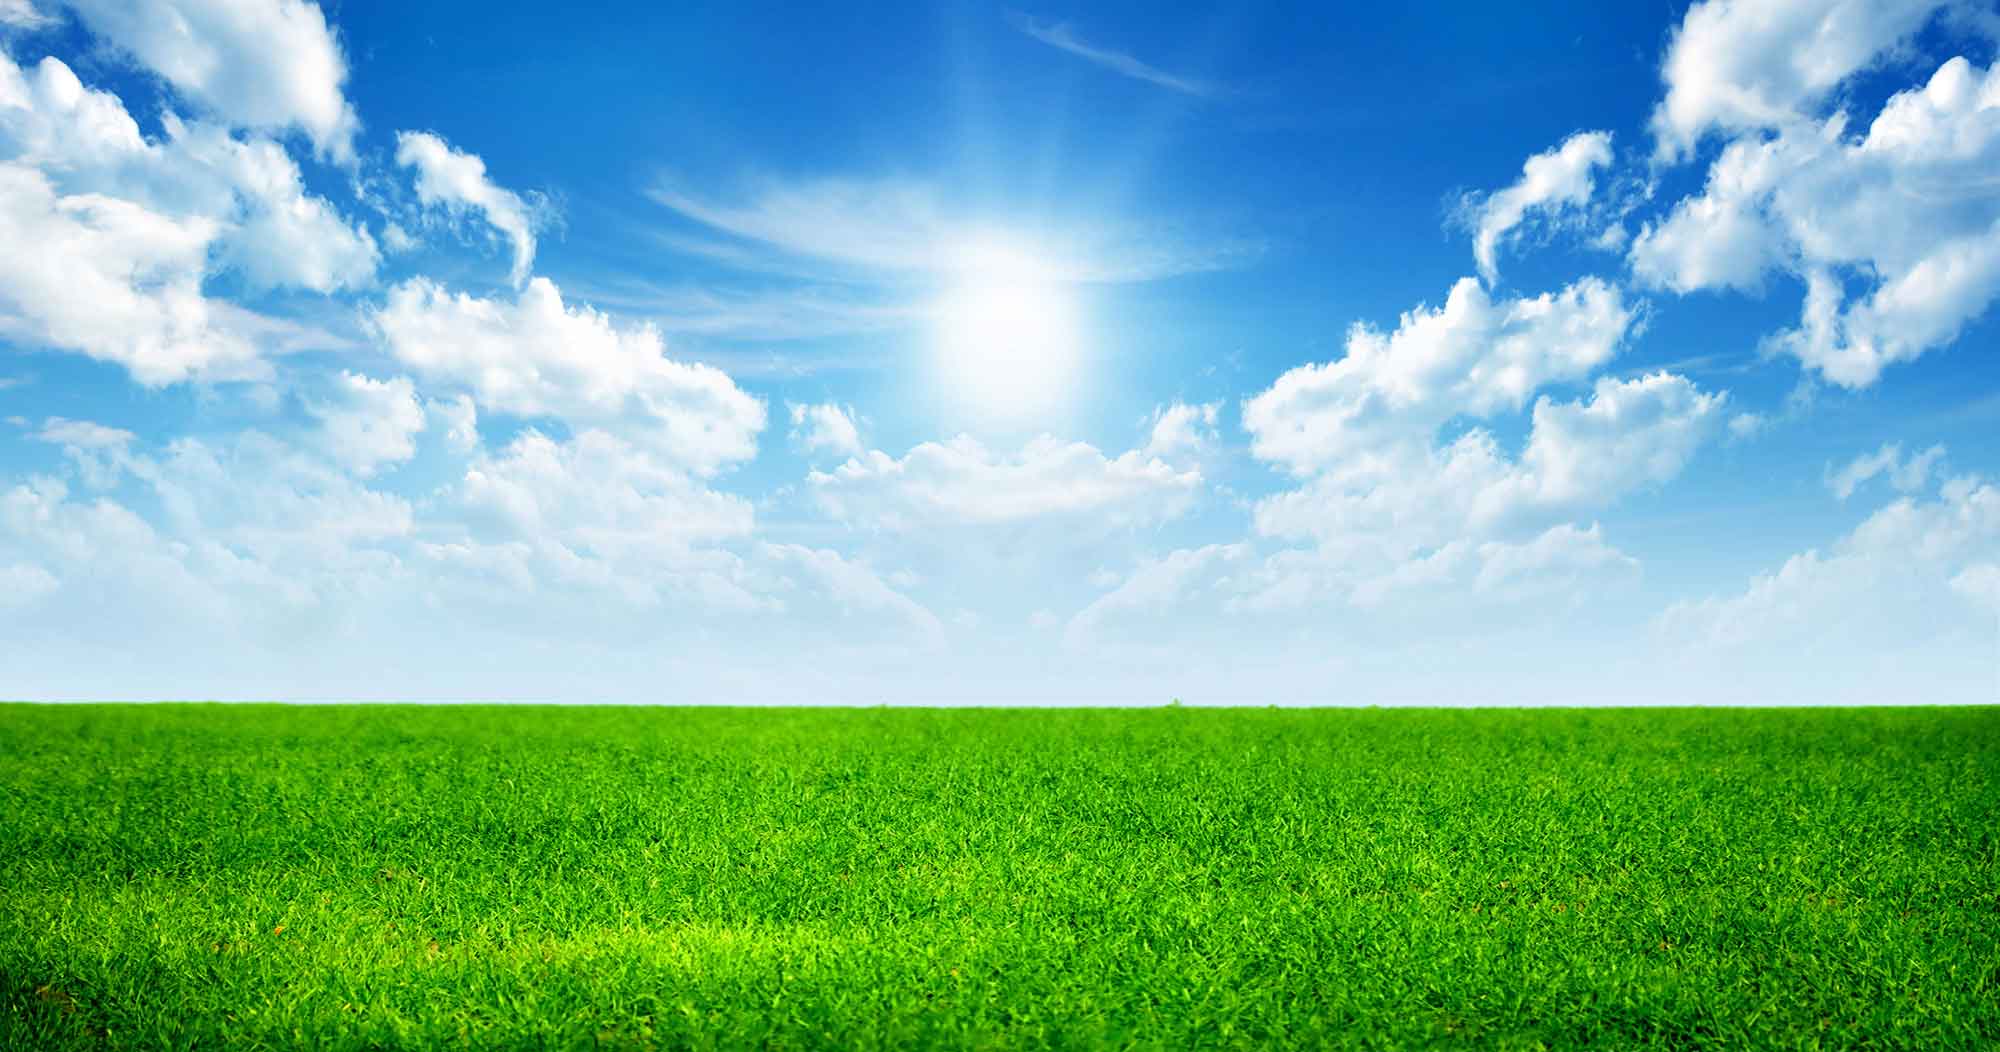 Wallpaper For > Green Grass And Sky Background